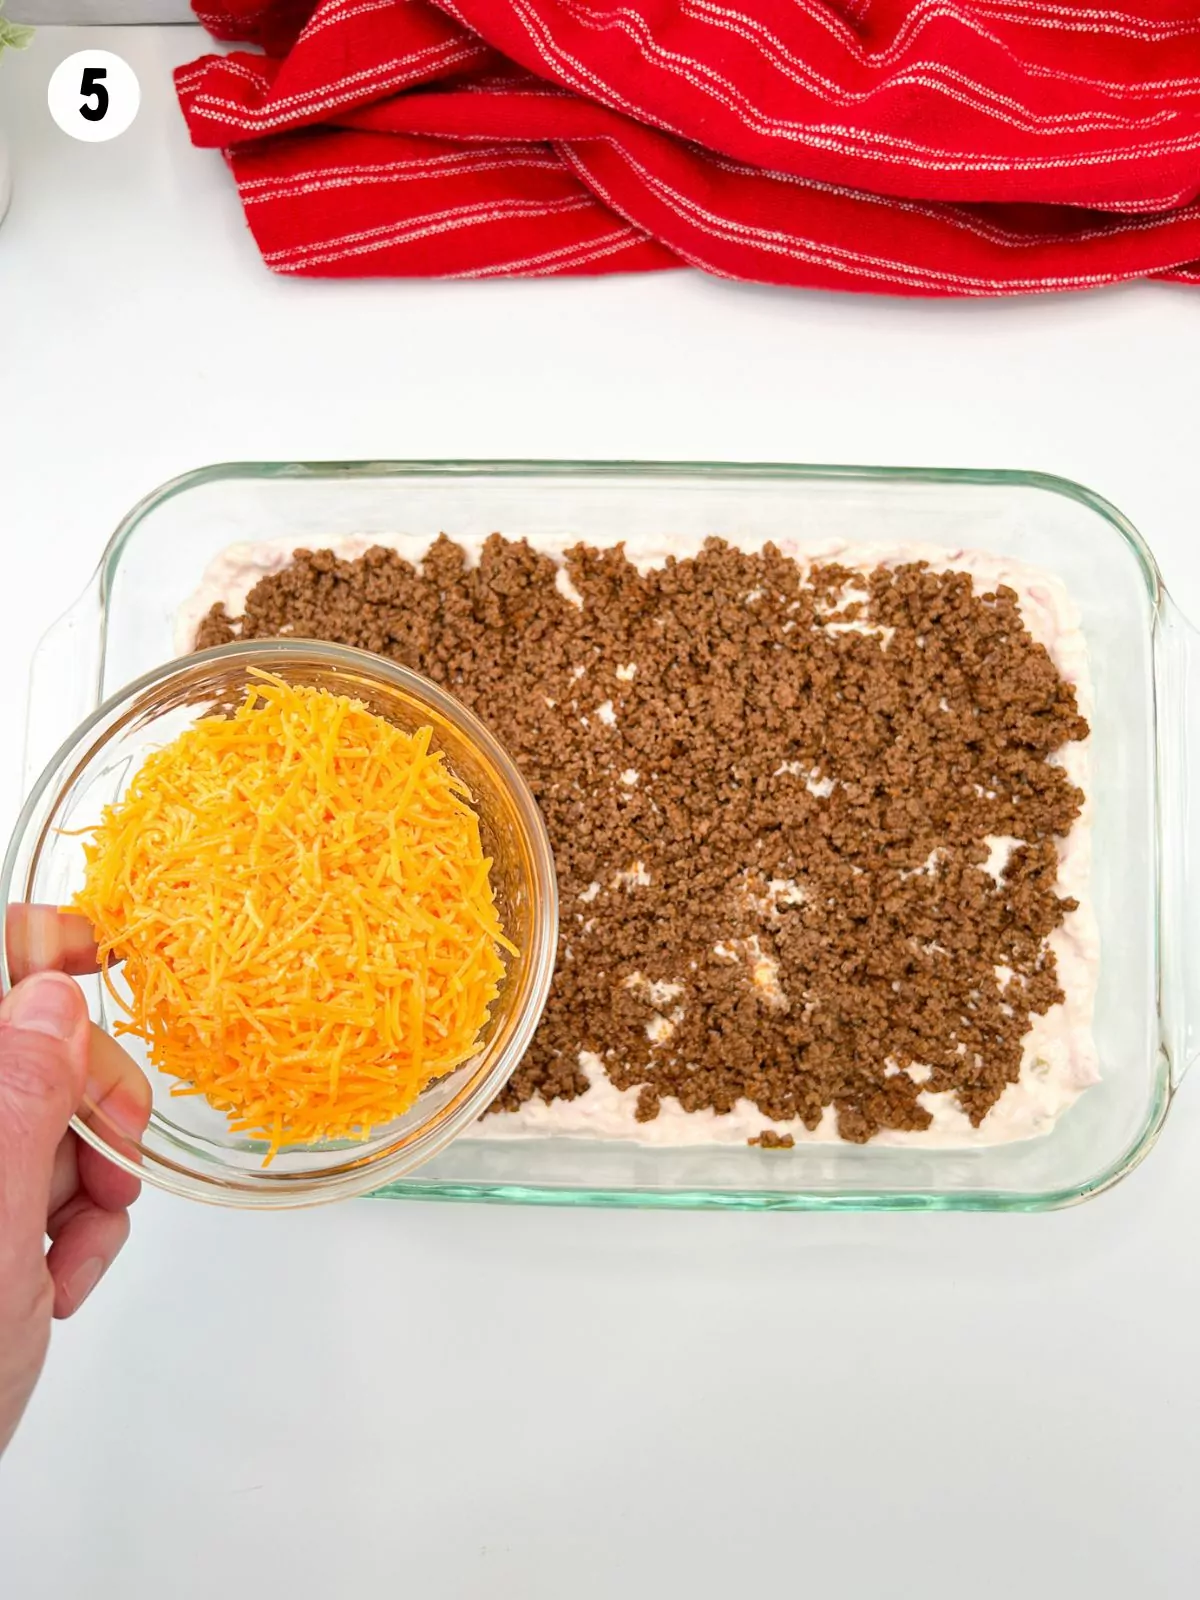 small bowl of cheddar cheese being held over taco dip with meat and cream cheese mixture.